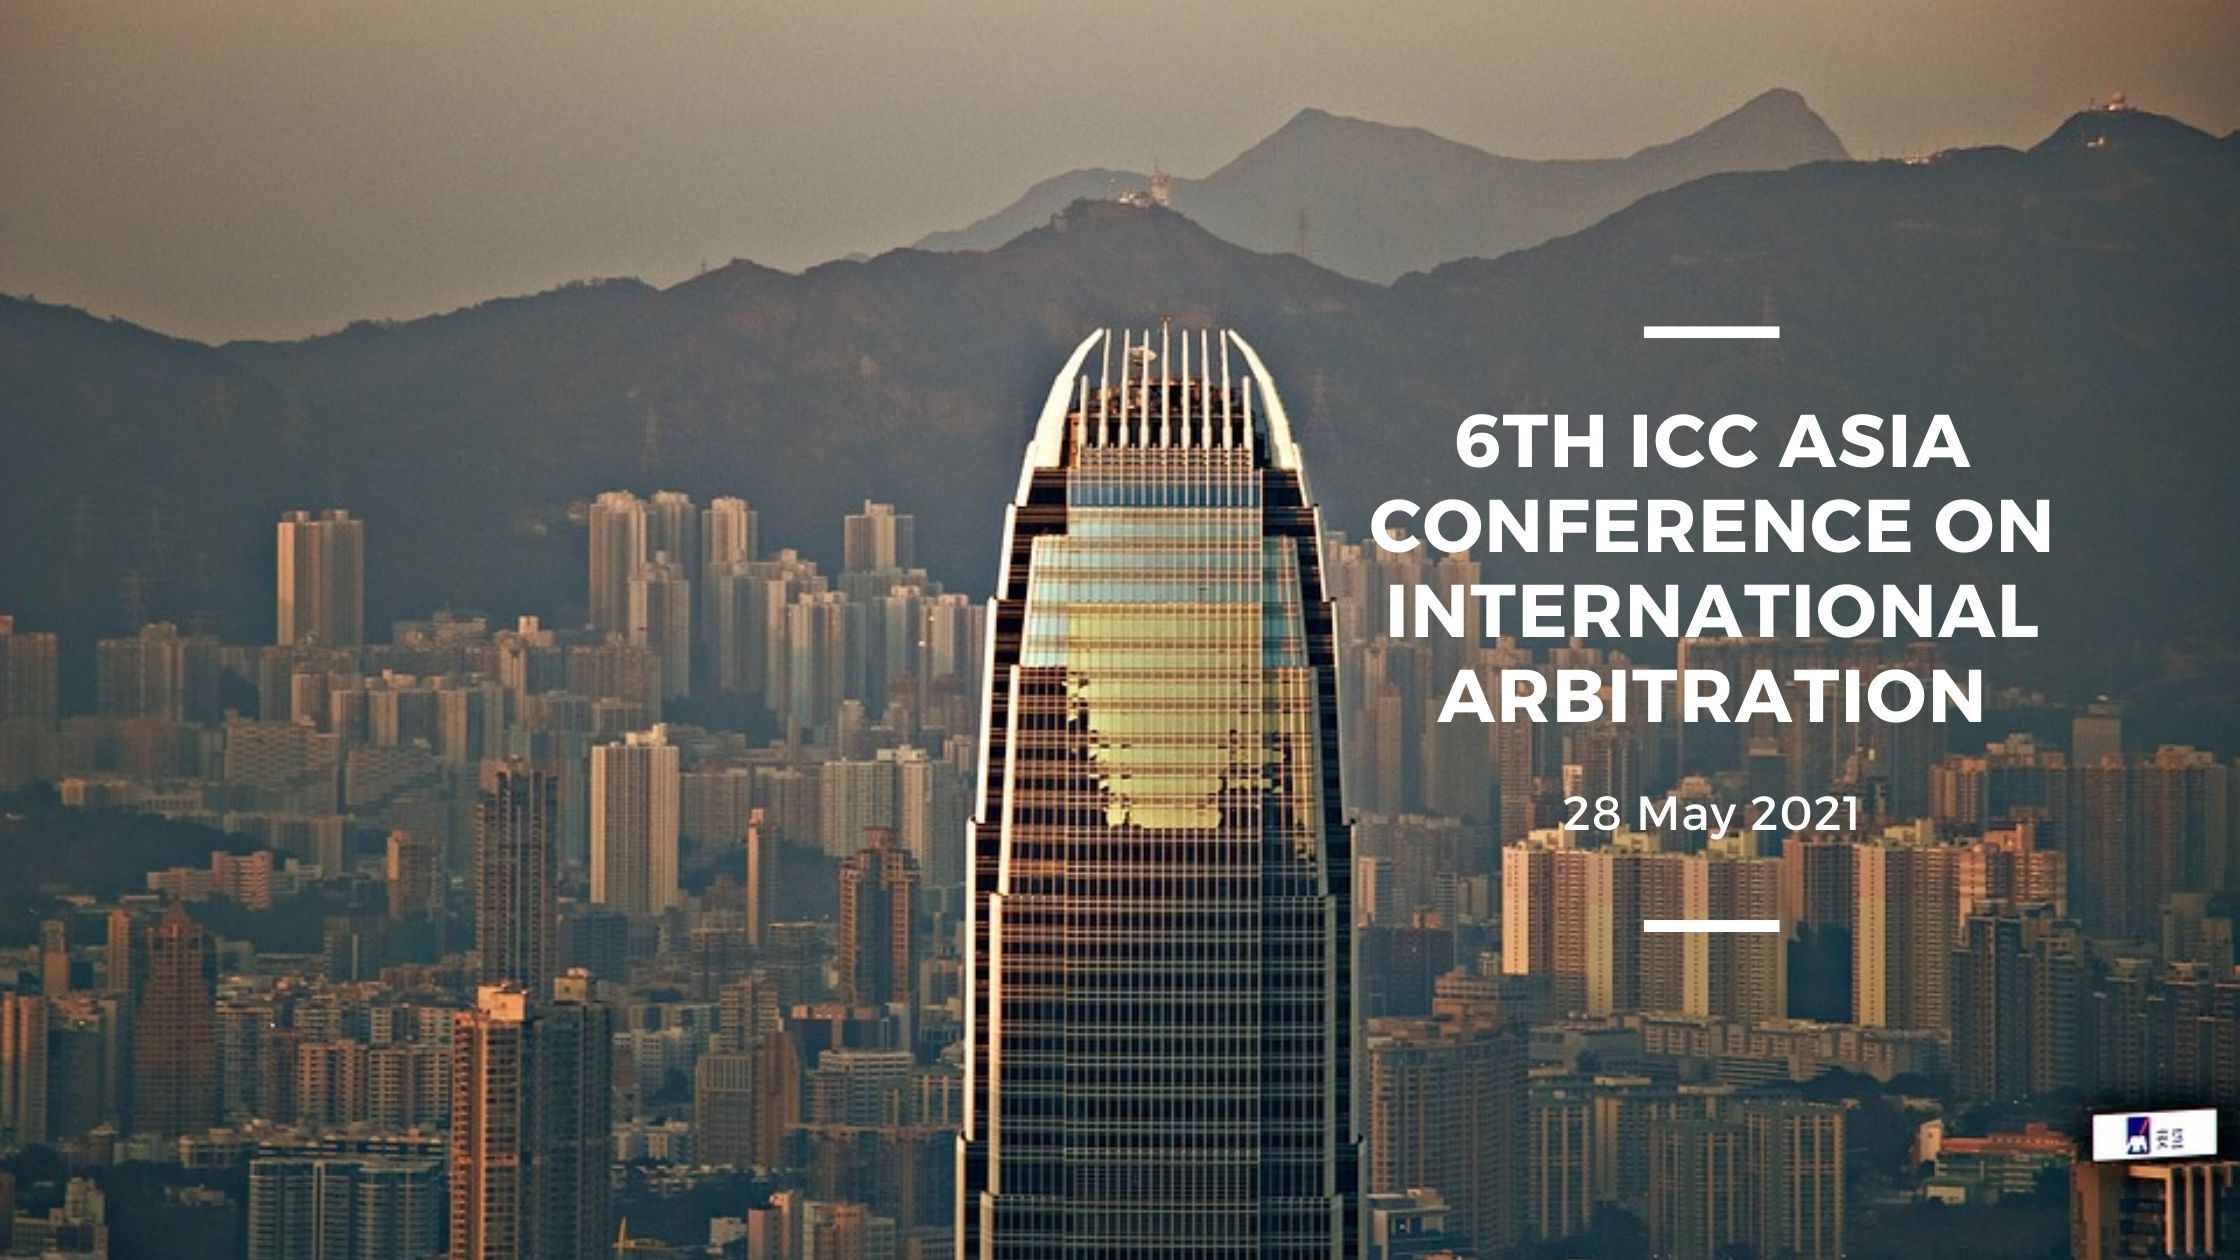 Events Online Event 6th ICC Asia Conference on International Arbitration